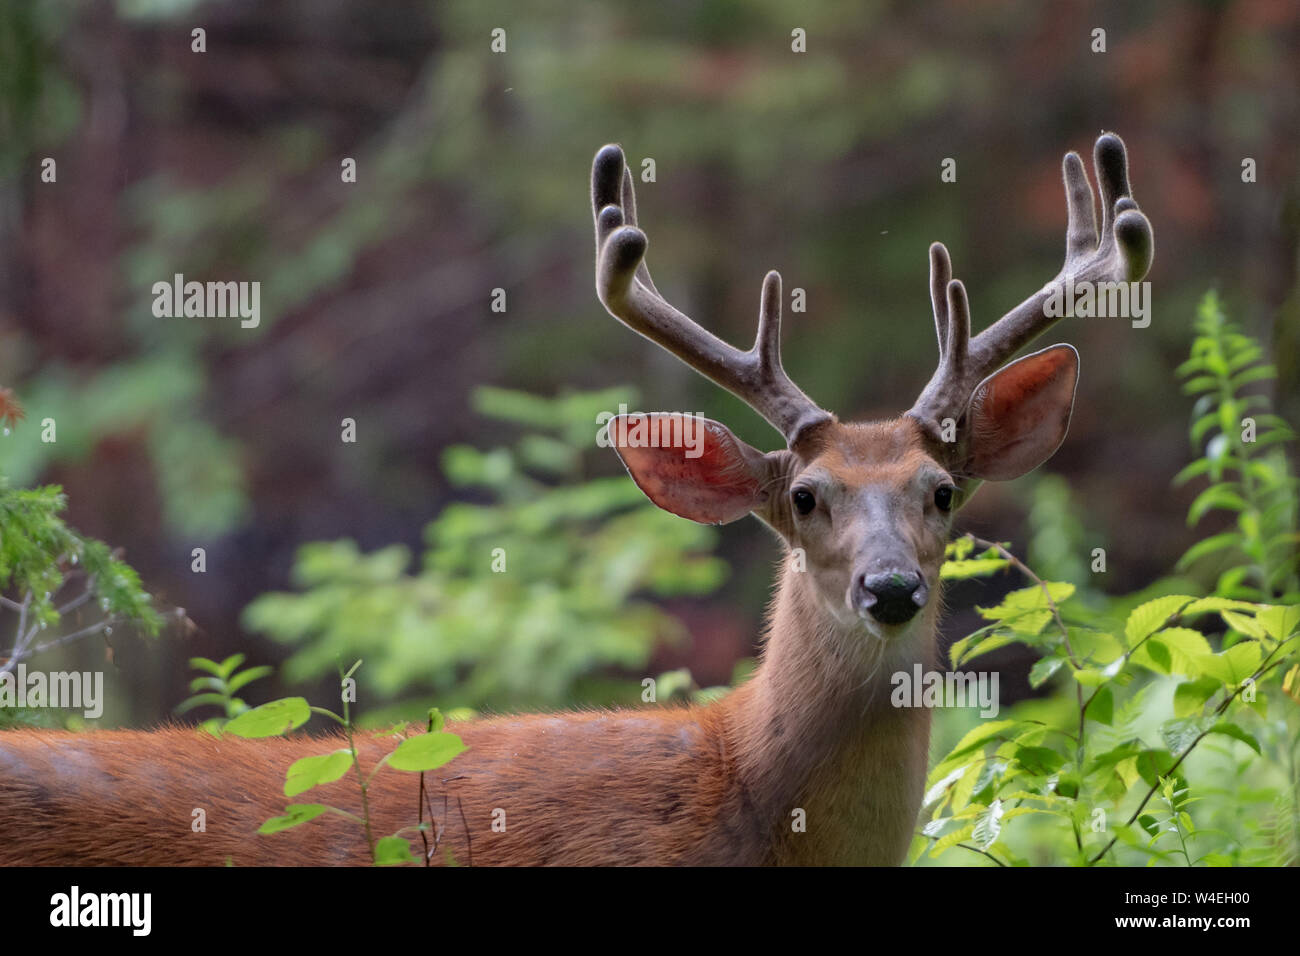 An alert trophy whitetail deer buck standing in the Adirondack Mountains forest wilderness with antlers still in velvet. Stock Photo